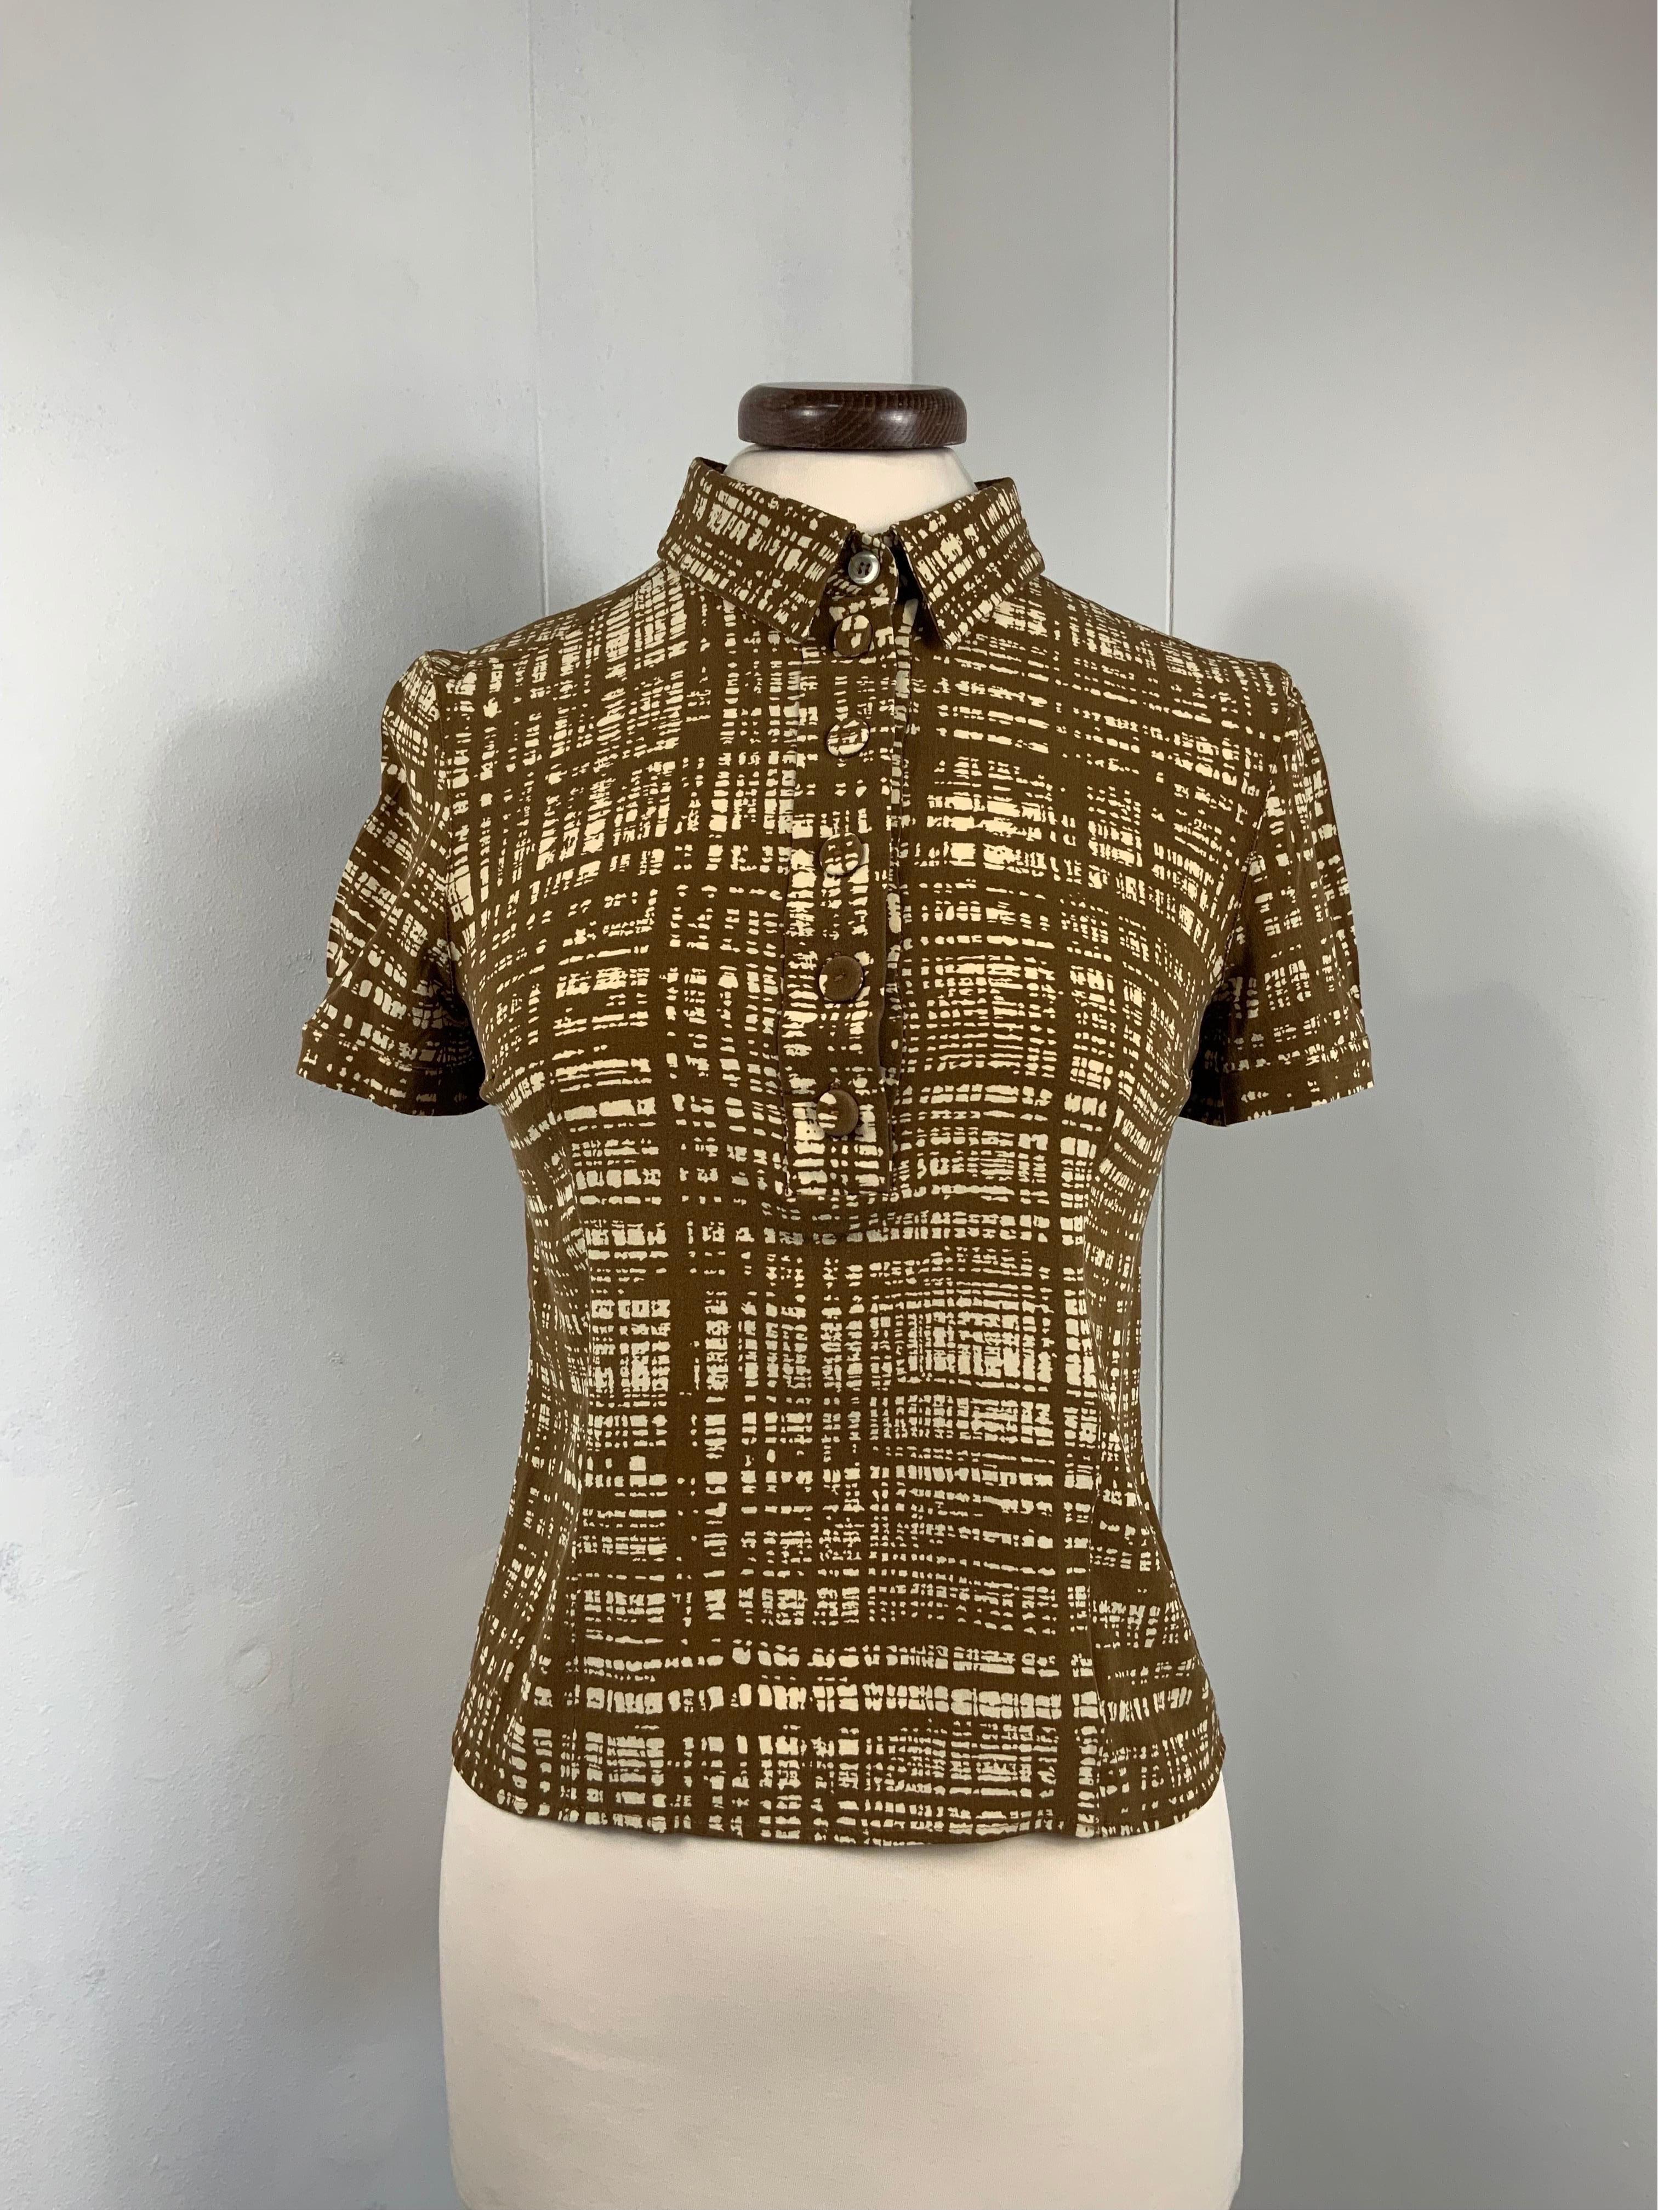 Prada iconic top.
Ugly chic spring 1996 collection.
Composition tag is missing but we reckon is silk.
Size 38 Italian.
Shoulders 38 cm
Bust 40 cm
Length 52 cm
Conditions: Excellent - Previously owned, like new or lightly worn, with small signs of